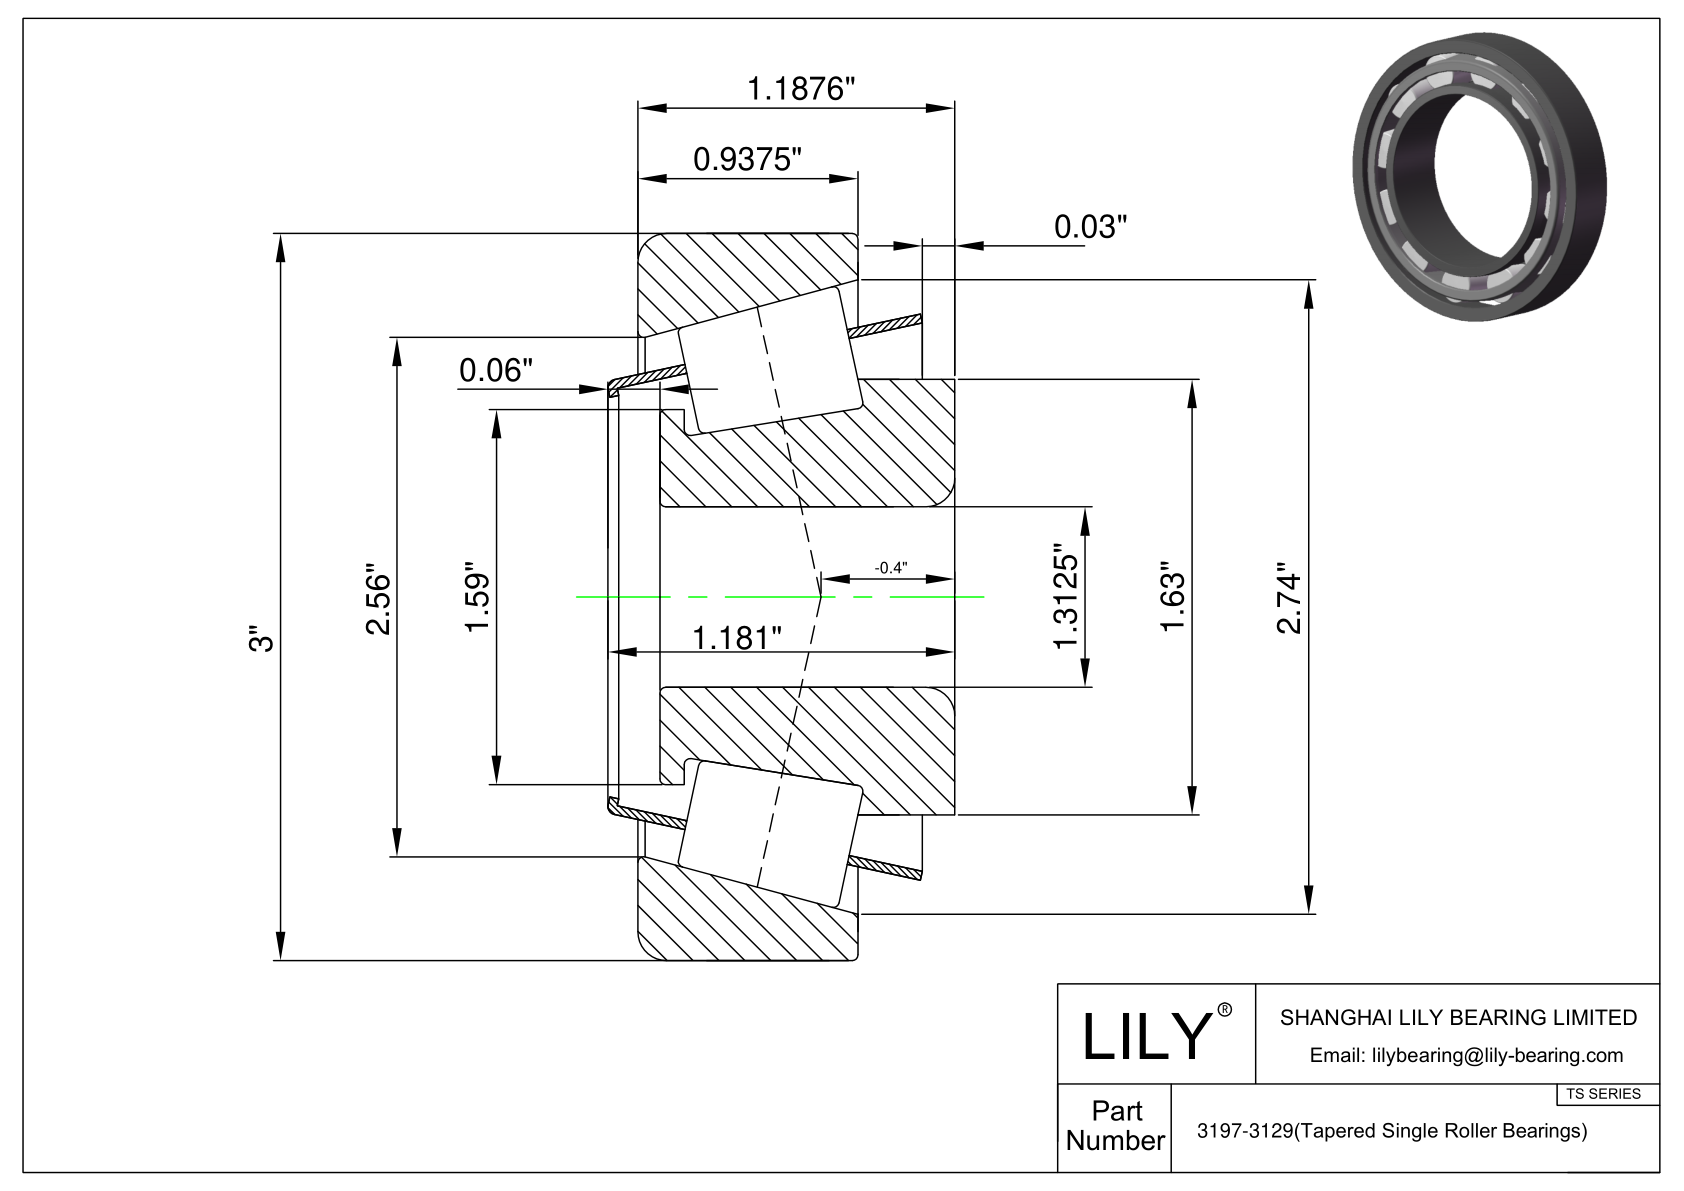 3197-3129 TS (Tapered Single Roller Bearings) (Imperial) cad drawing